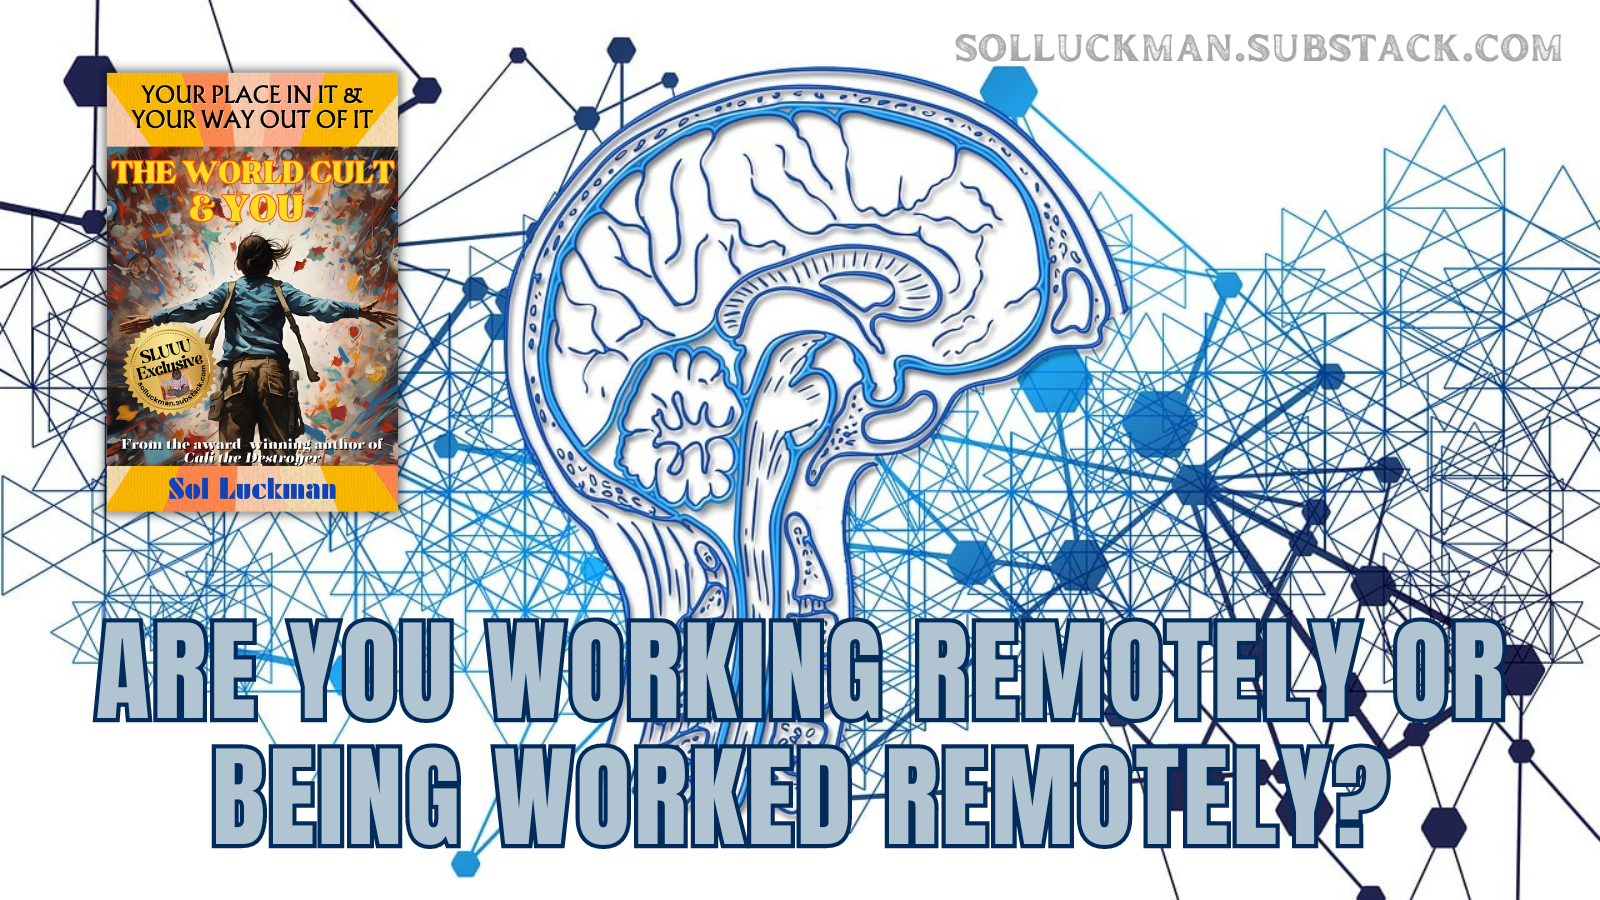 Are You Working Remotely or Being Worked Remotely?